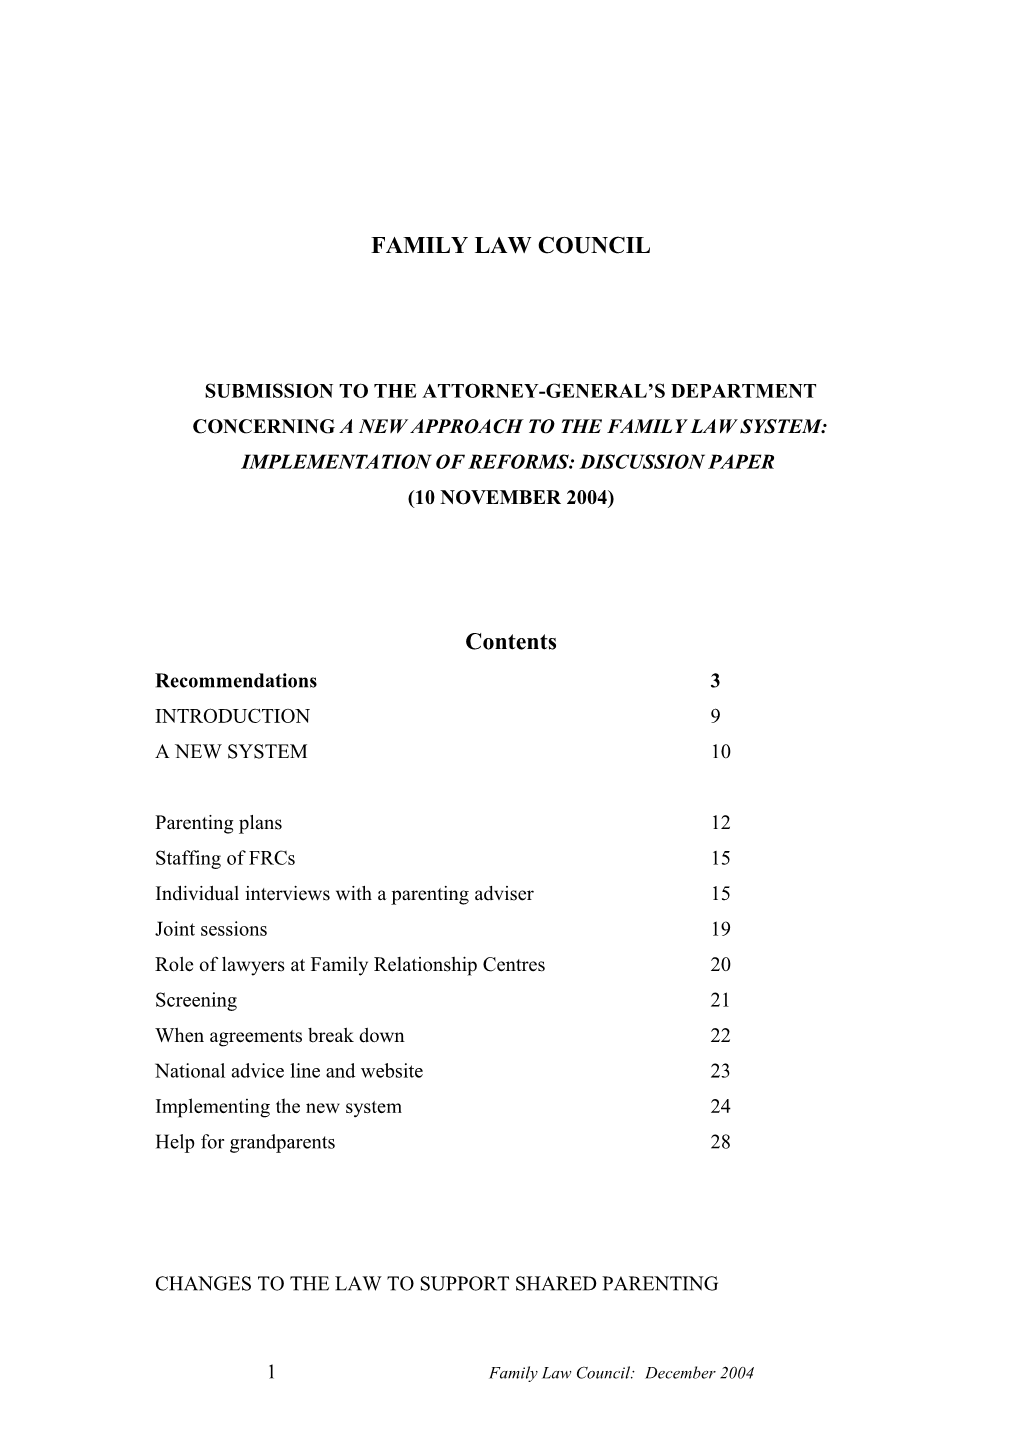 Submission Concerning a New Approach to the Family Law System Implementation of Reforms